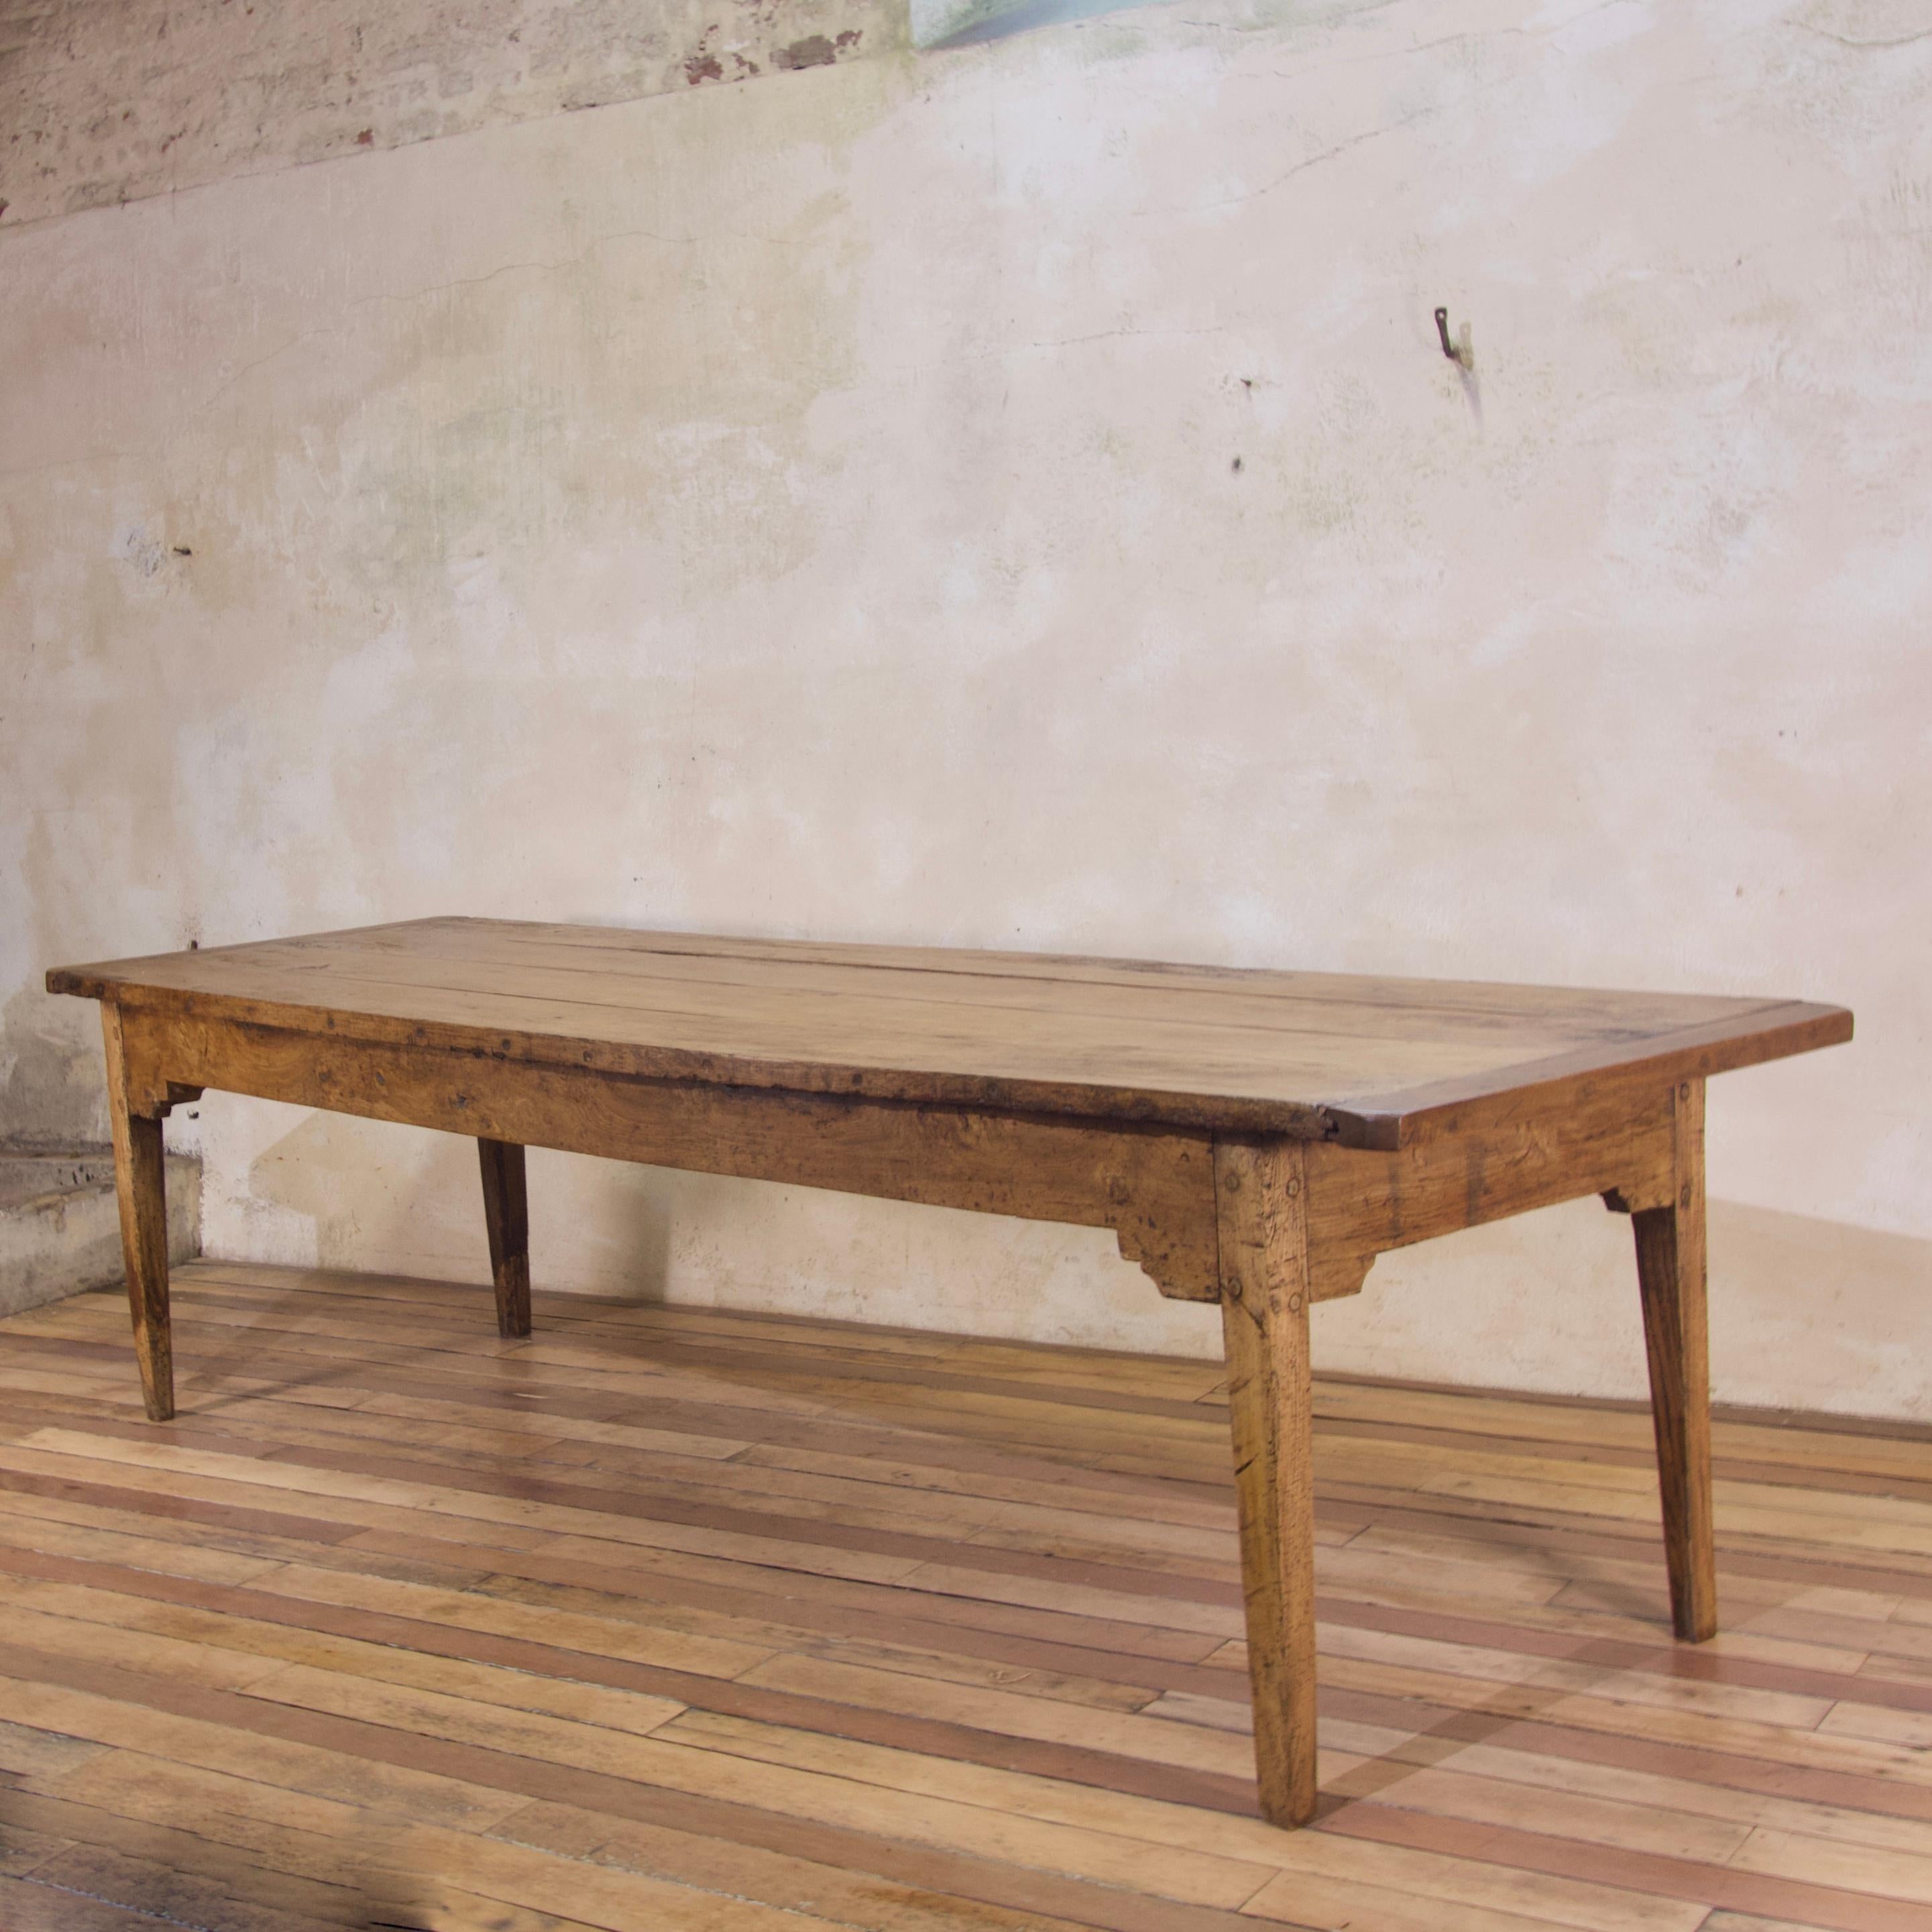 An exceptional late 18th century elm country farmhouse table. Displaying a majestic four plank top, with a rich and warm patina and a superbly figured grain. Demonstrating later cleated ends, a method that was incorporated to try and ensure that the